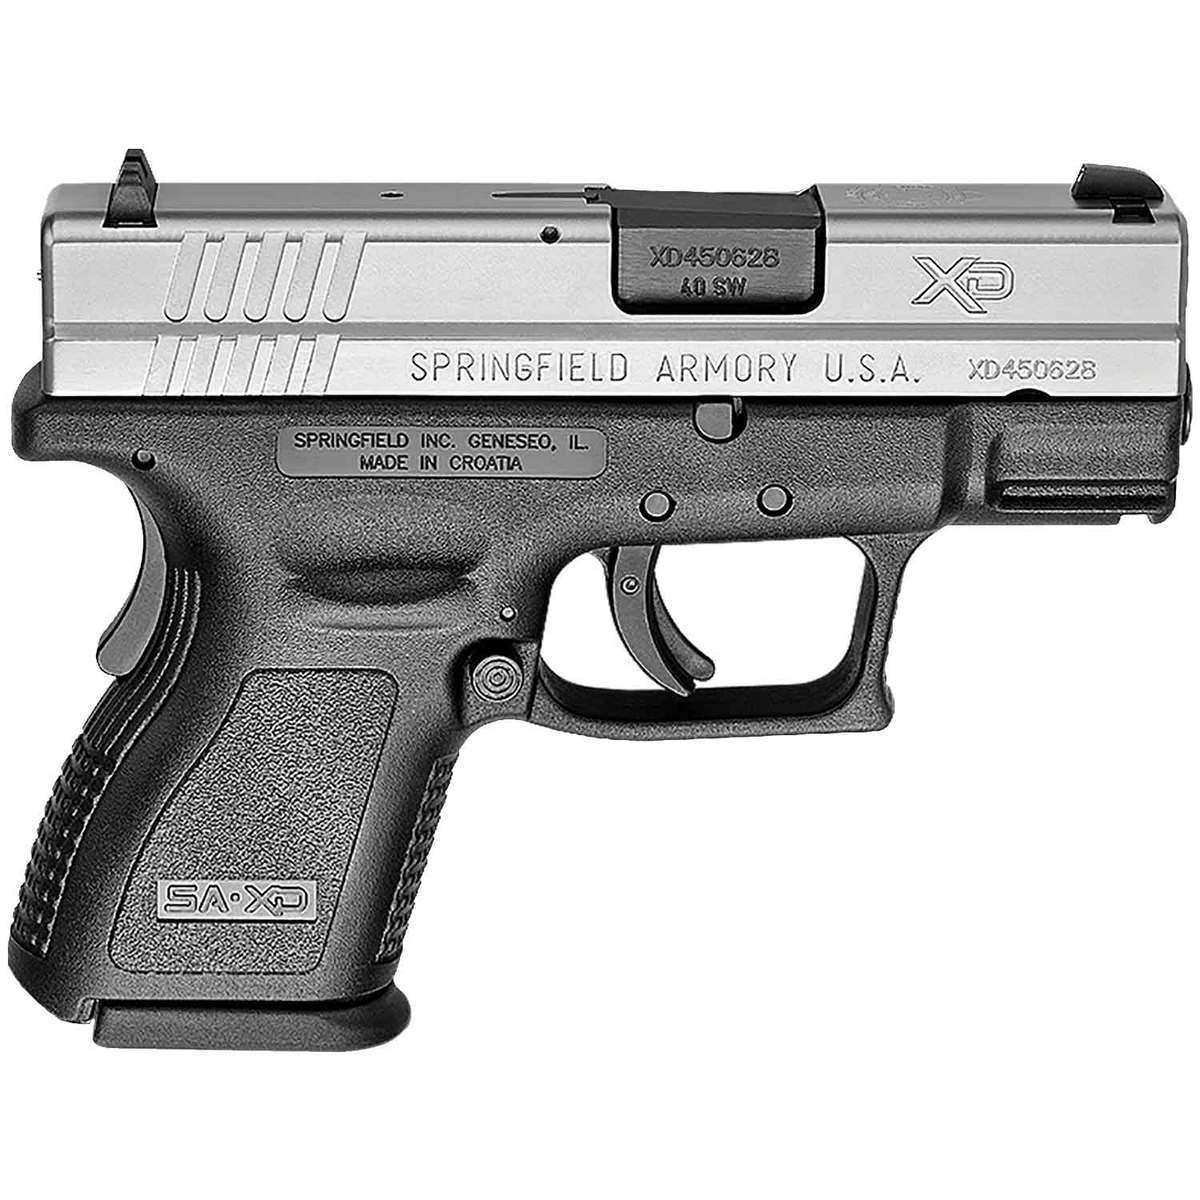 springfield-armory-xd-sub-compact-40-s-w-3in-black-stainless-pistol-9-1-rounds-california